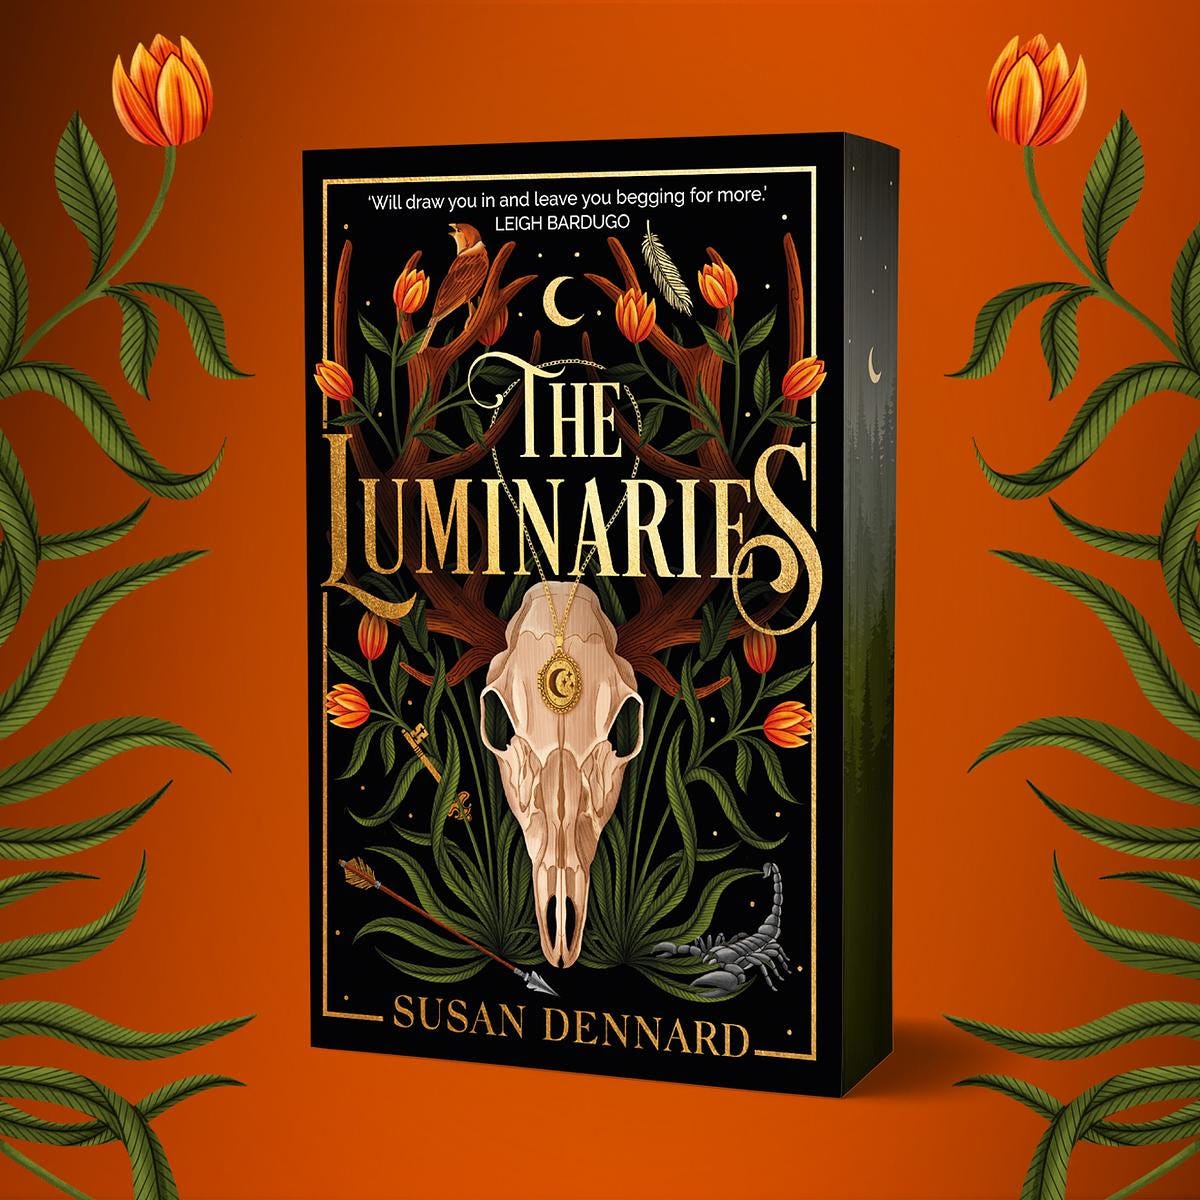 The Waterstones edition of The Luminaries